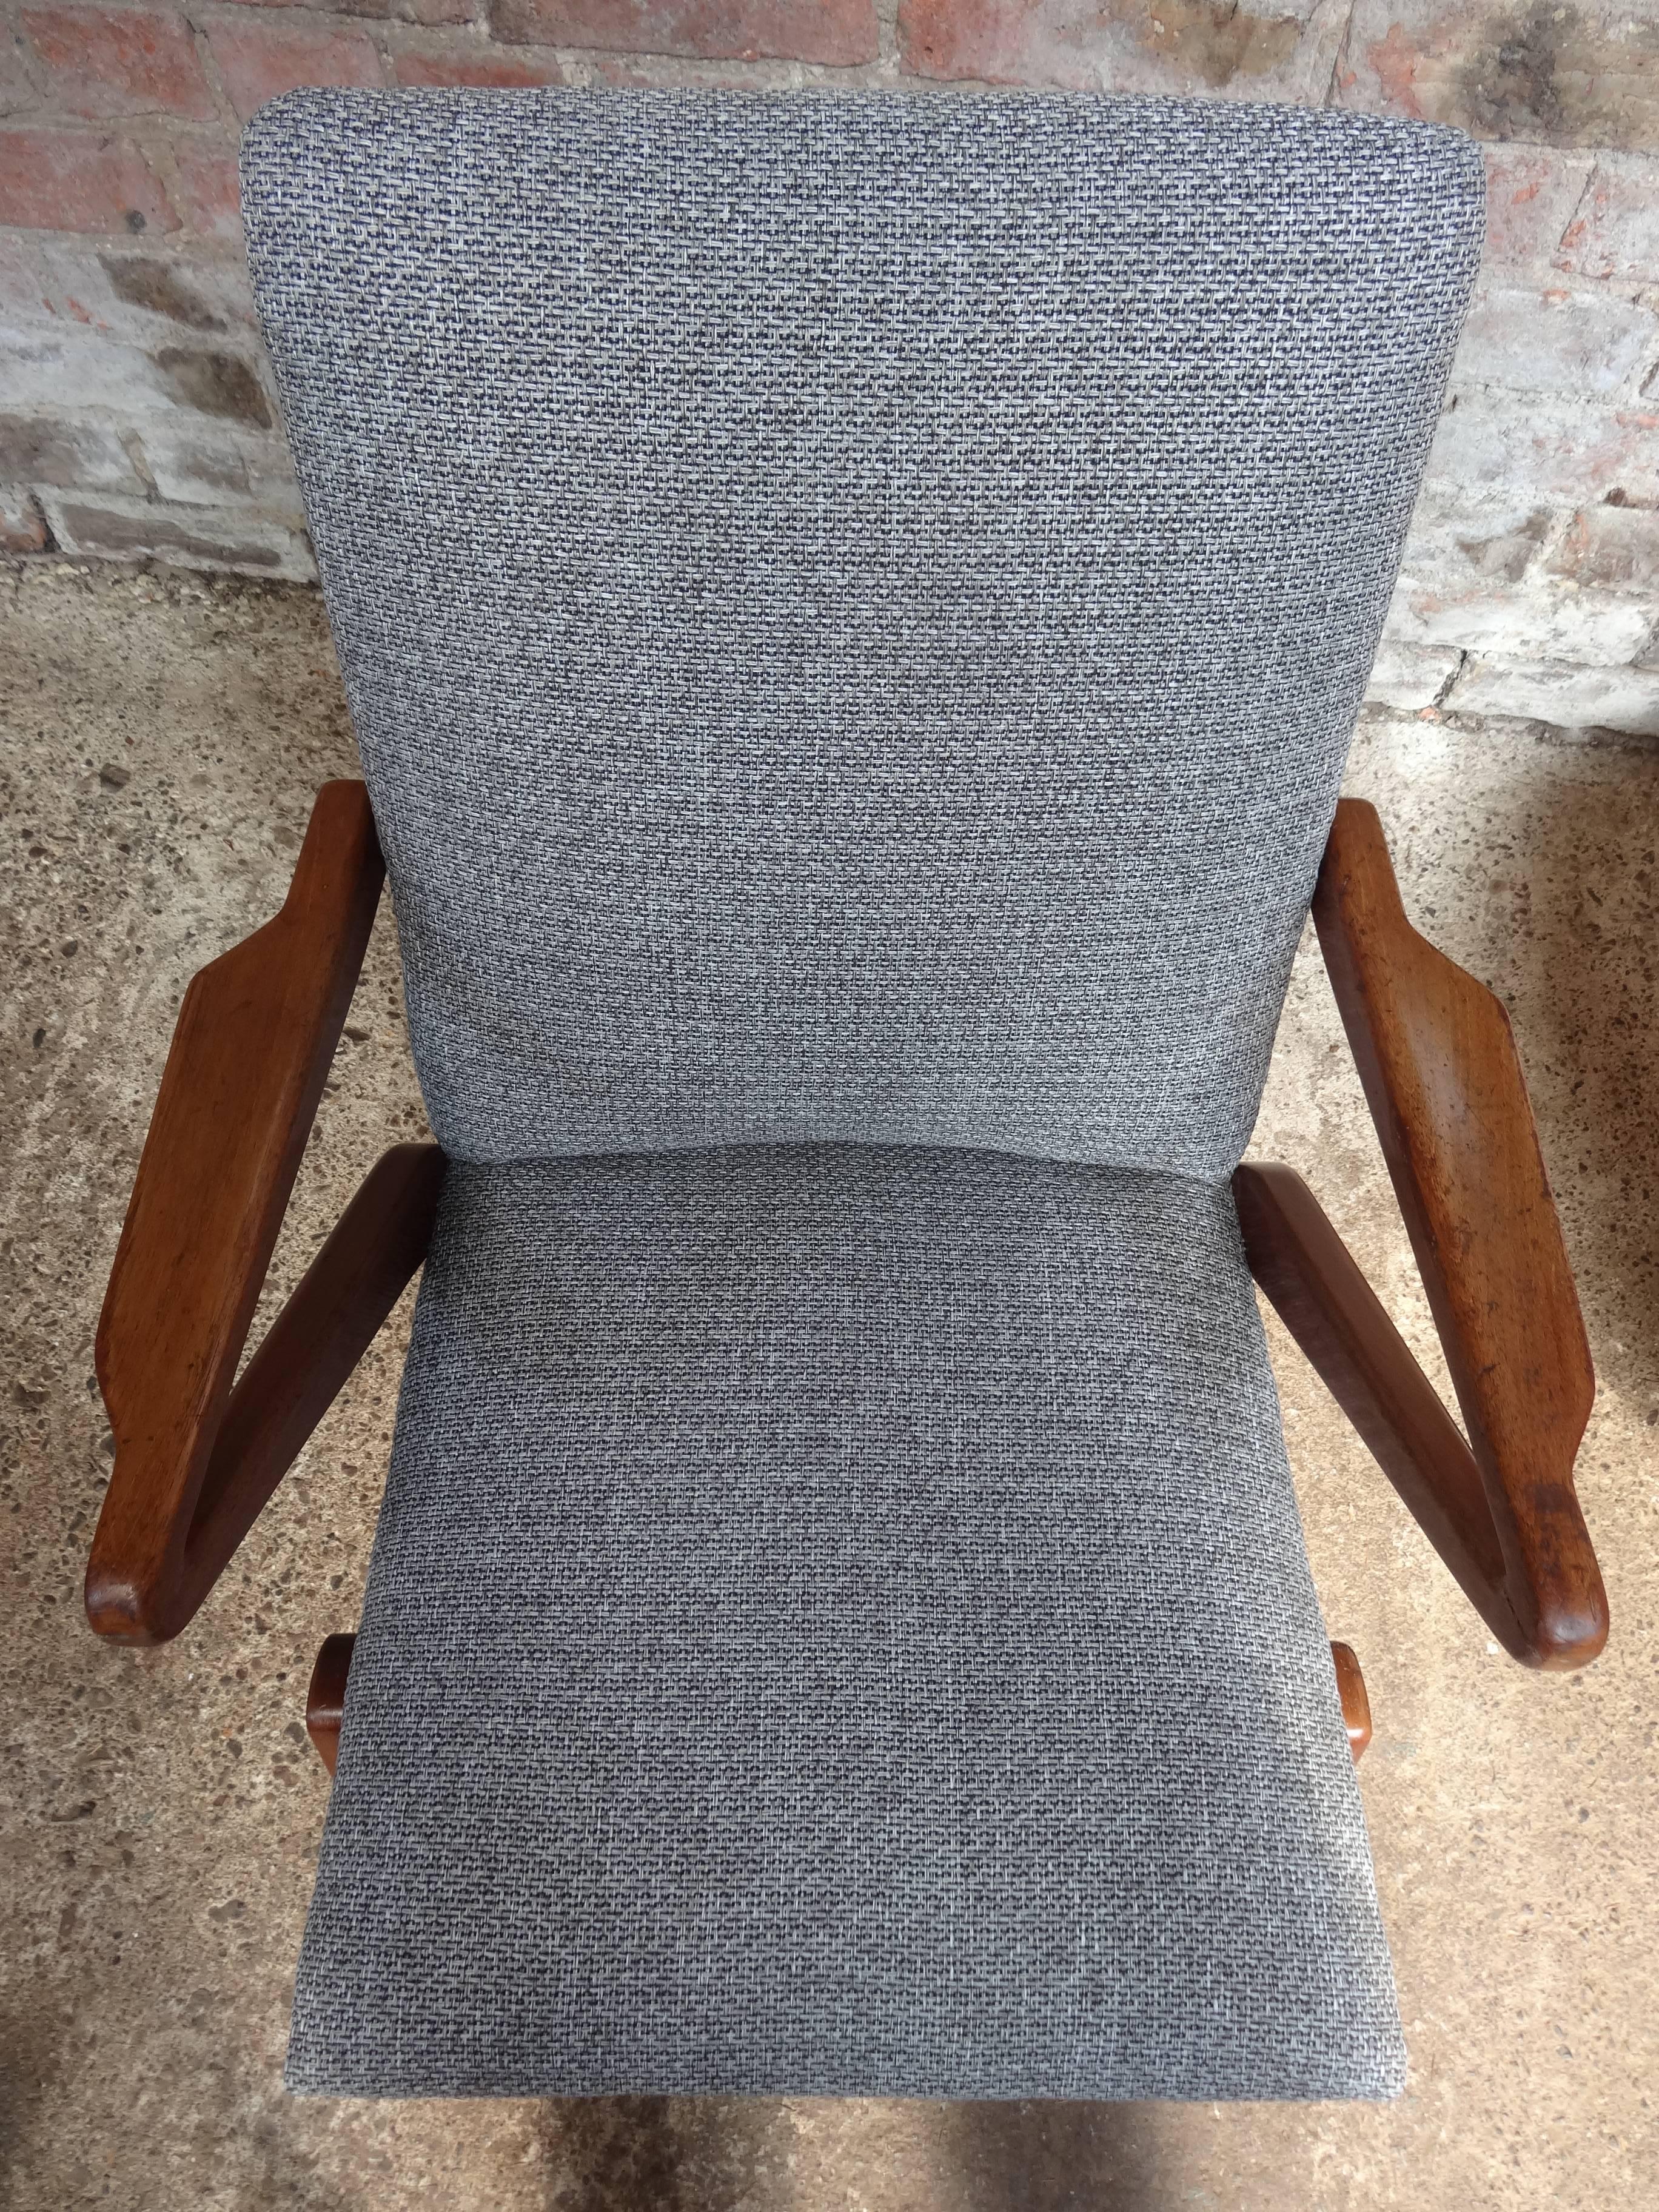 1950s Newly Upholstered Grey Fabric Retro Vintage Teak Armchair For Sale 6